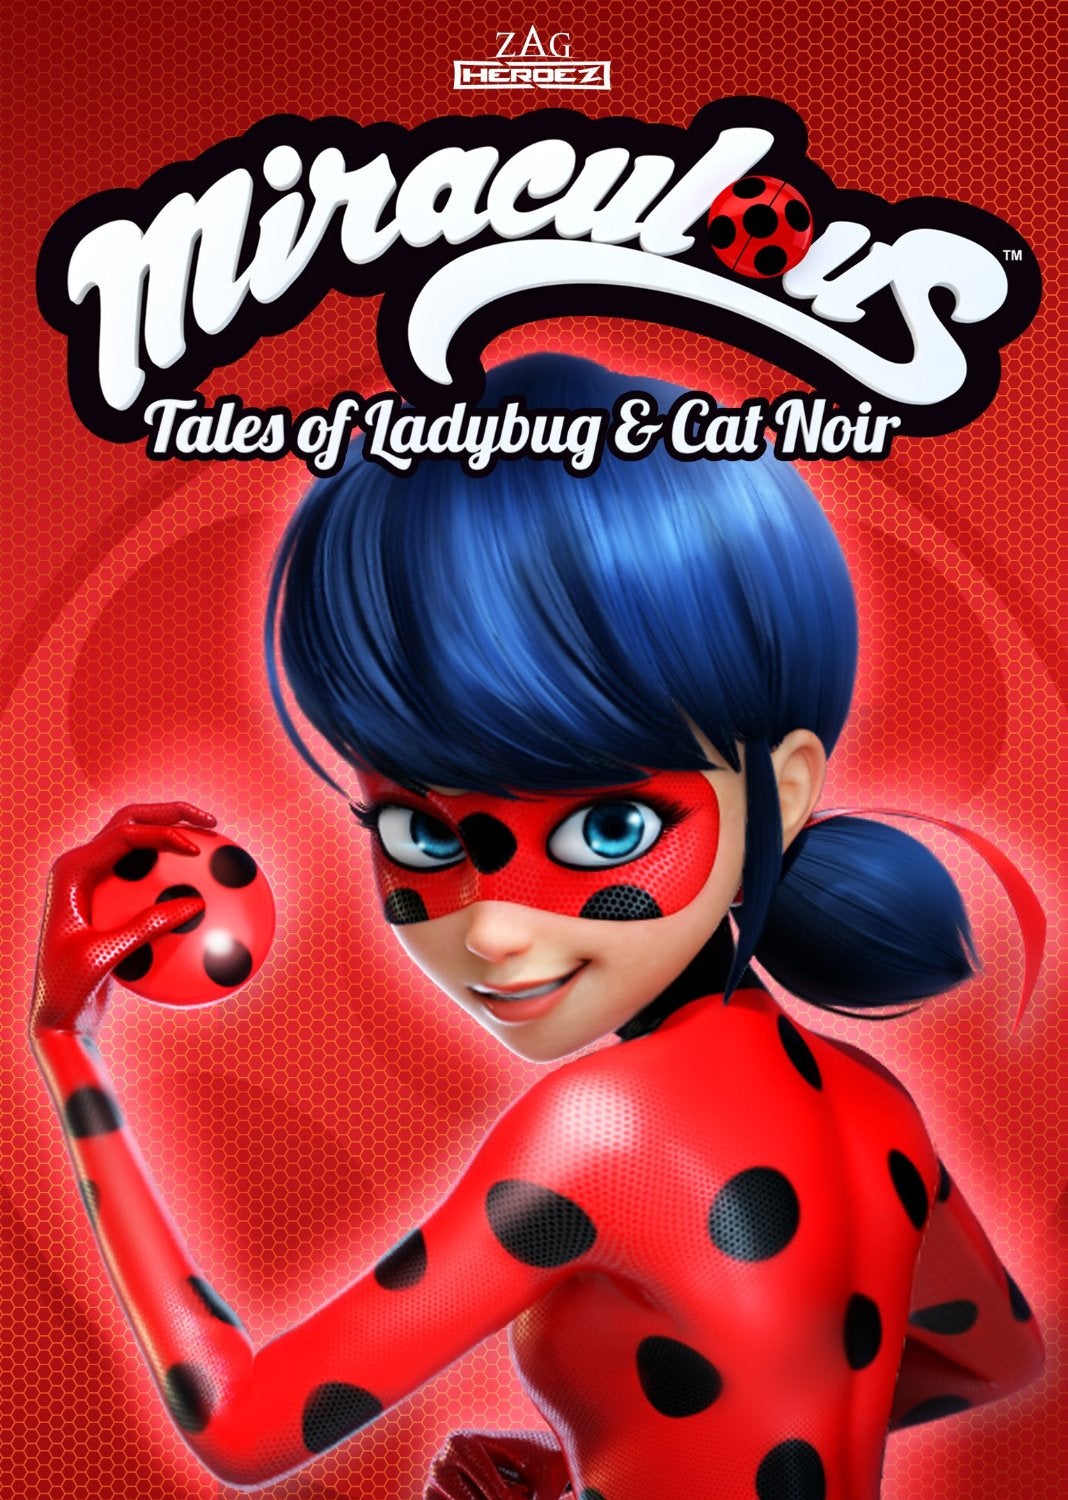 ashley standrew recommends pics of ladybug from miraculous pic